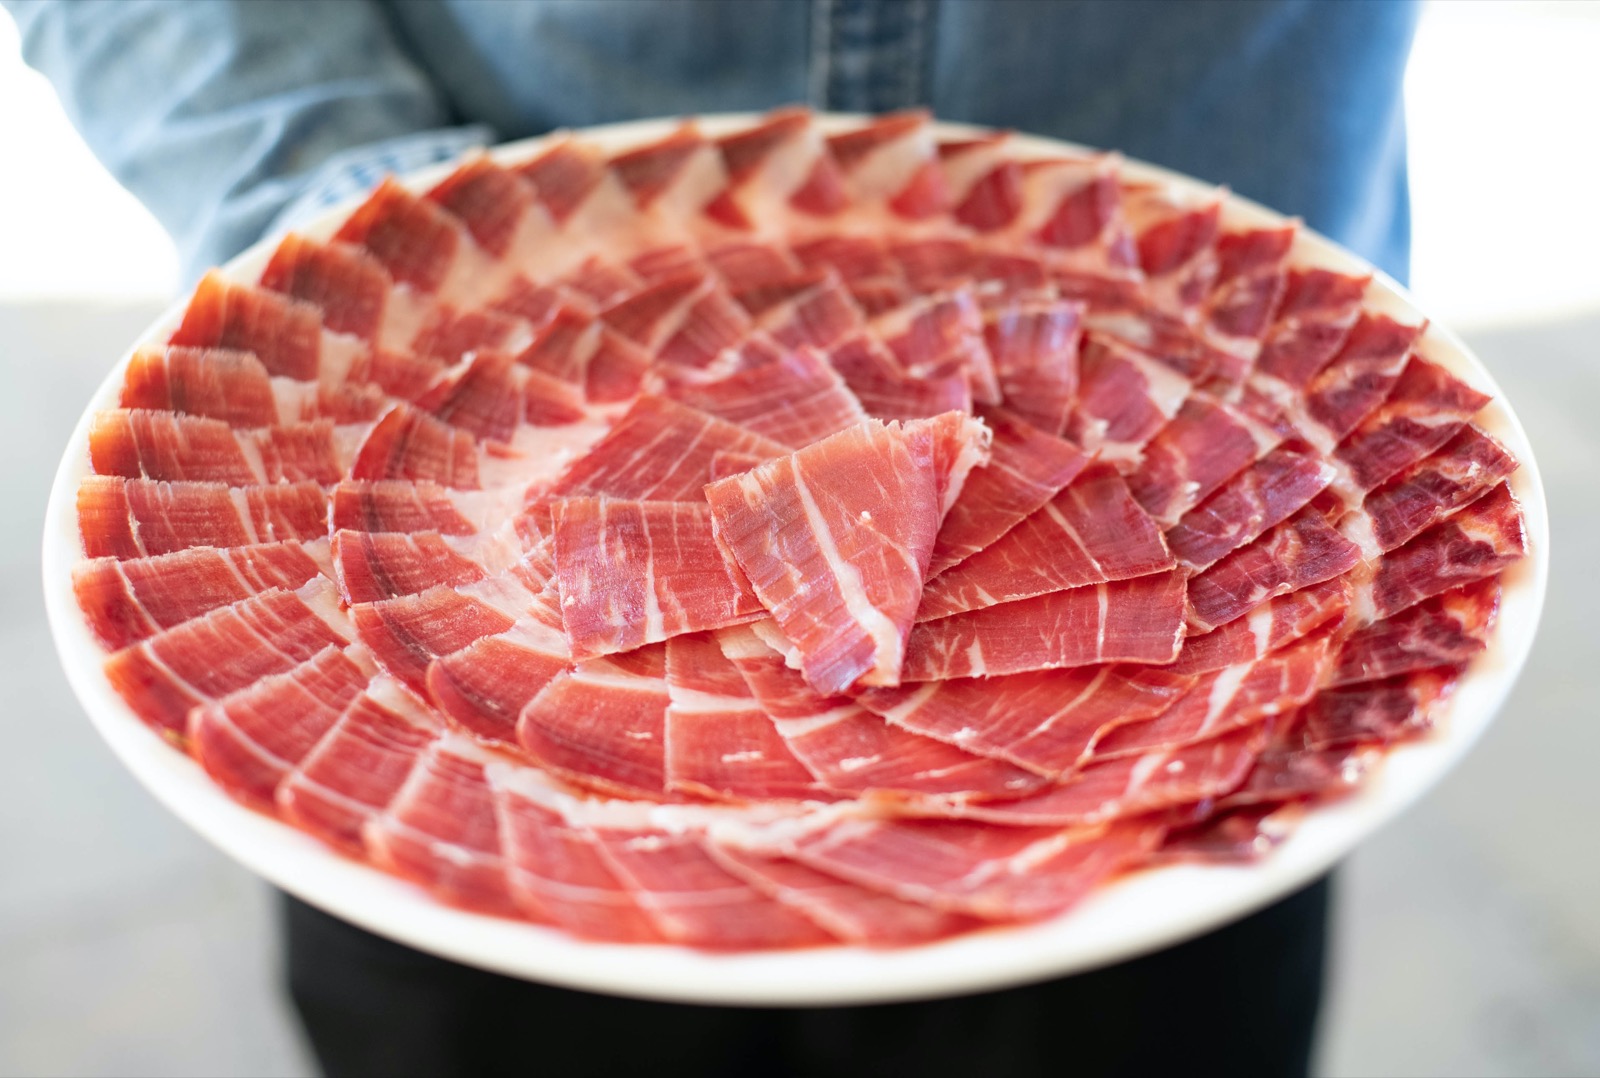 🍴 If You’ve Tried 18/27 of These Foods, You’re a Sophisticated Eater Iberico Ham